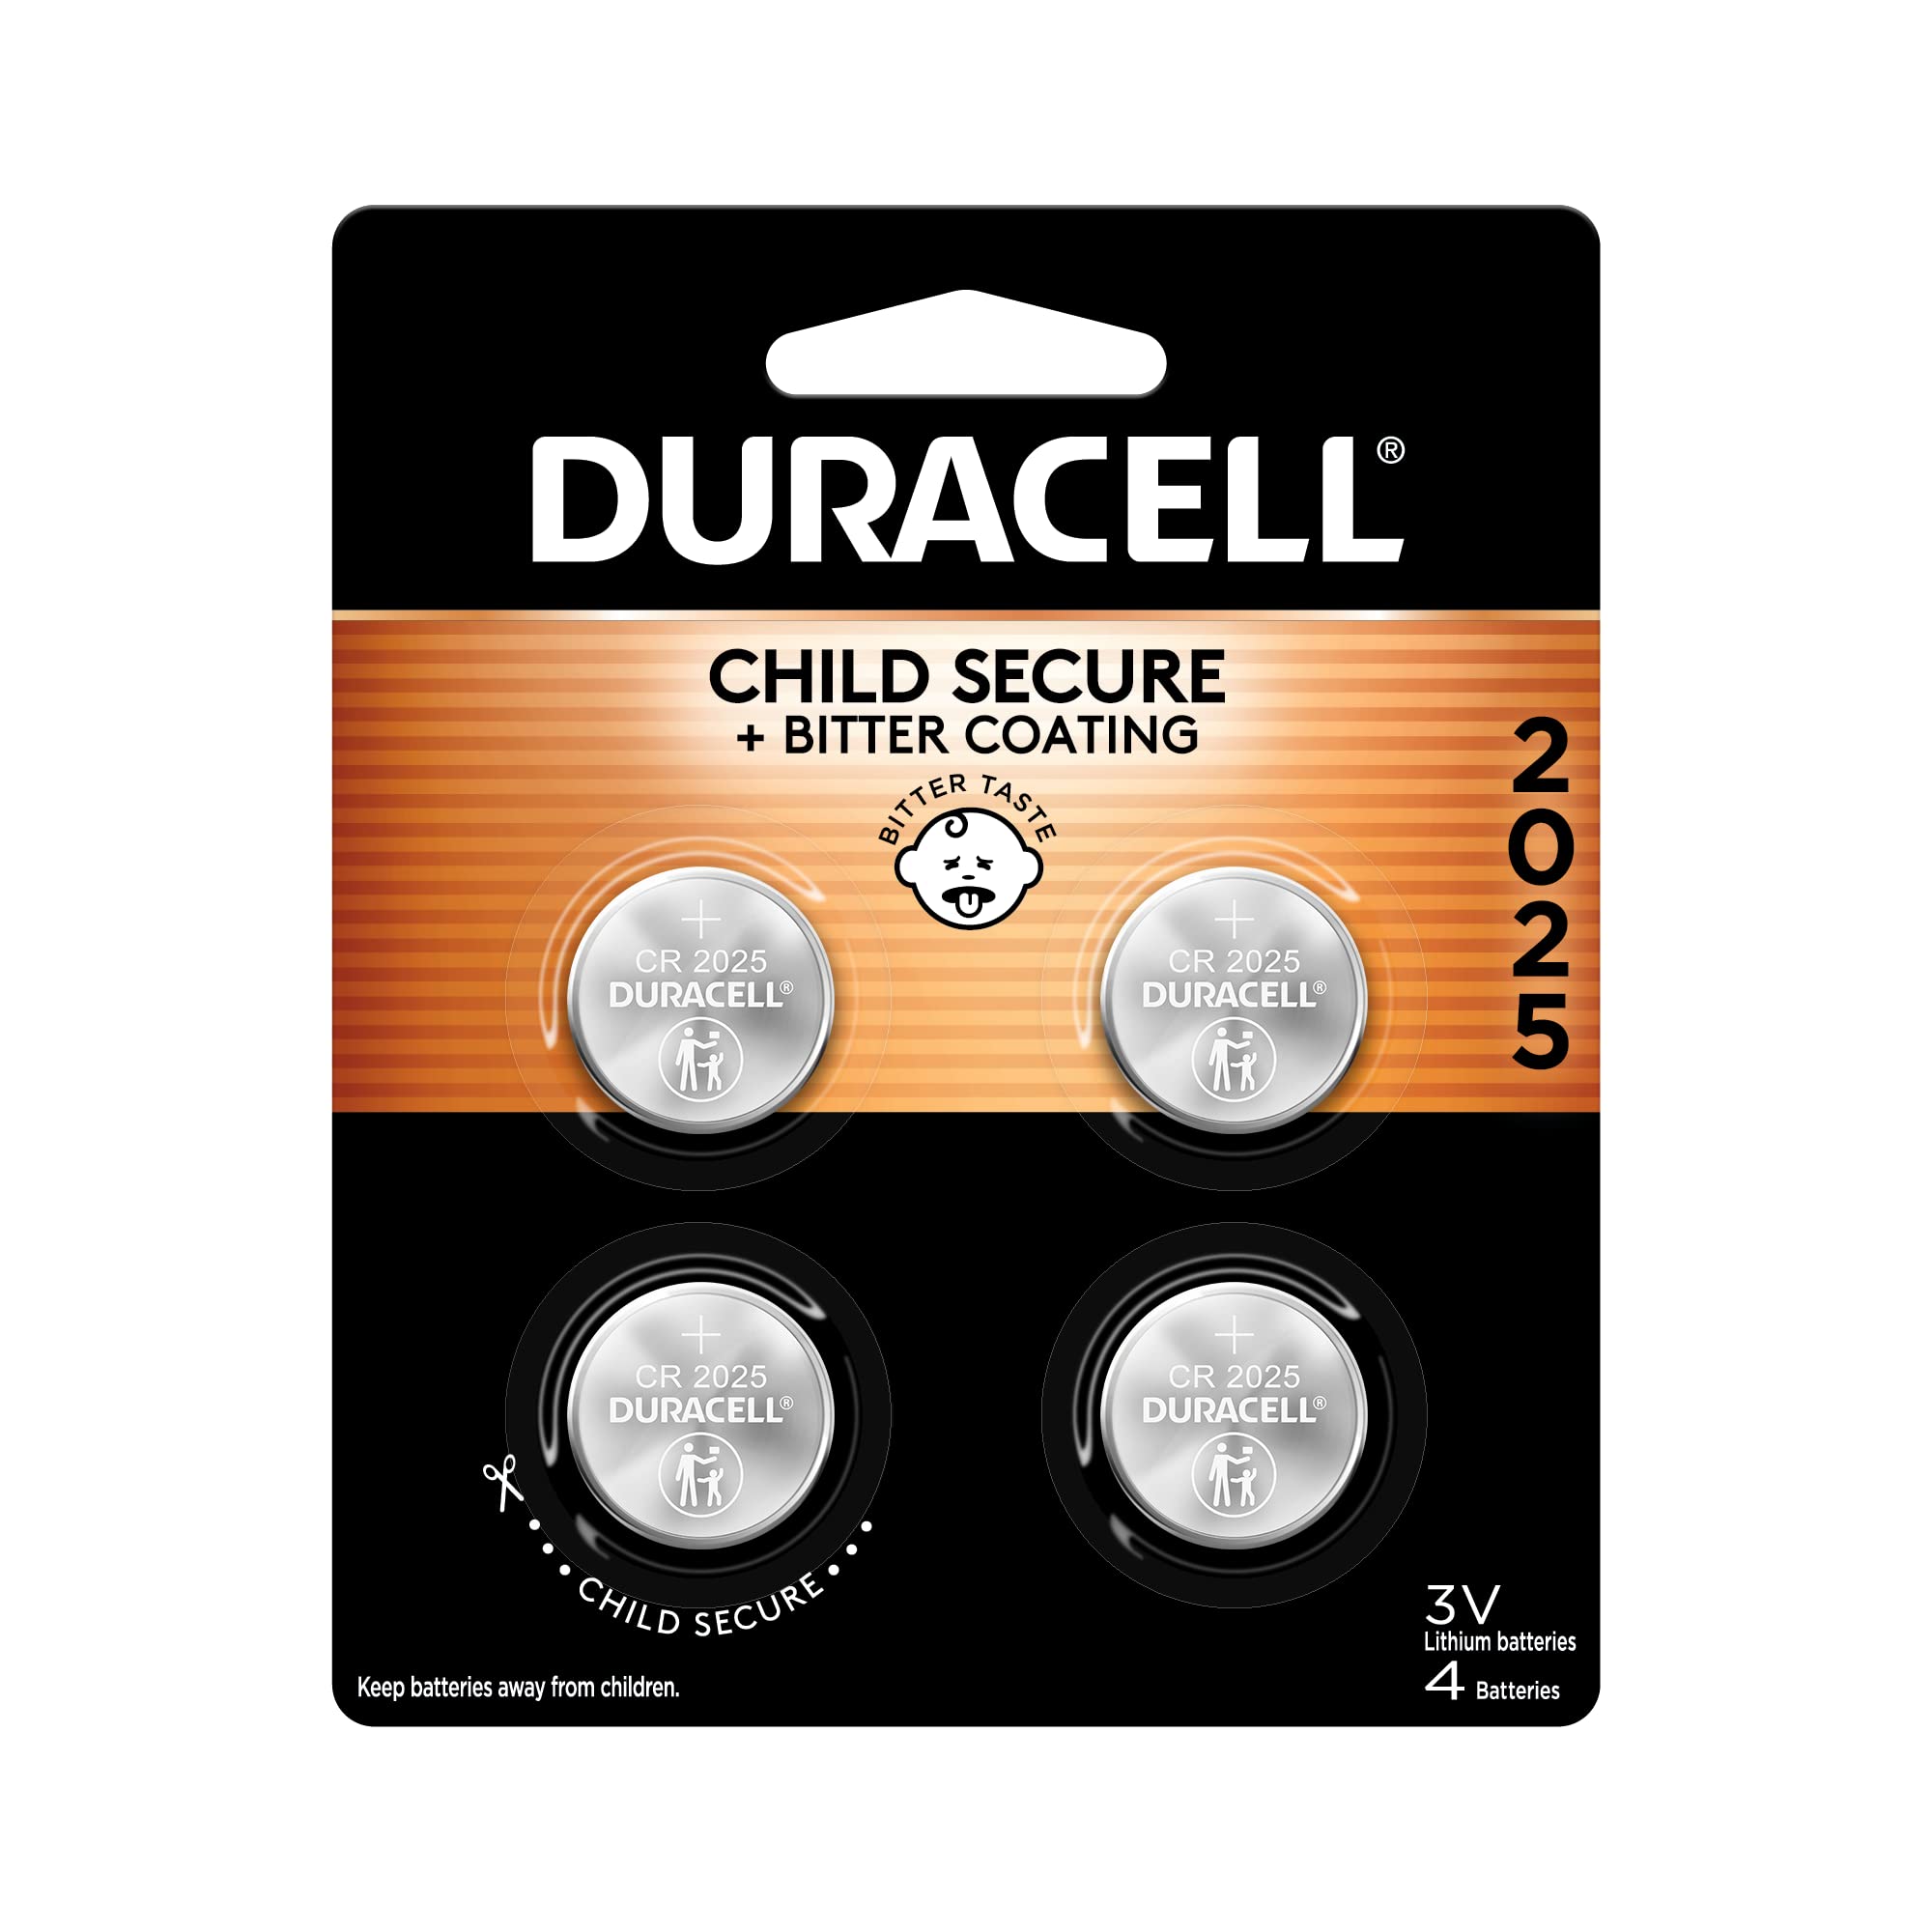 Duracell CR2025 3V Lithium Battery, Child Safety Features, 4 Count Pack, Lithium Coin Battery for Key Fob, Car Remote, Glucose Monitor, CR Lithium 3 Volt Cell